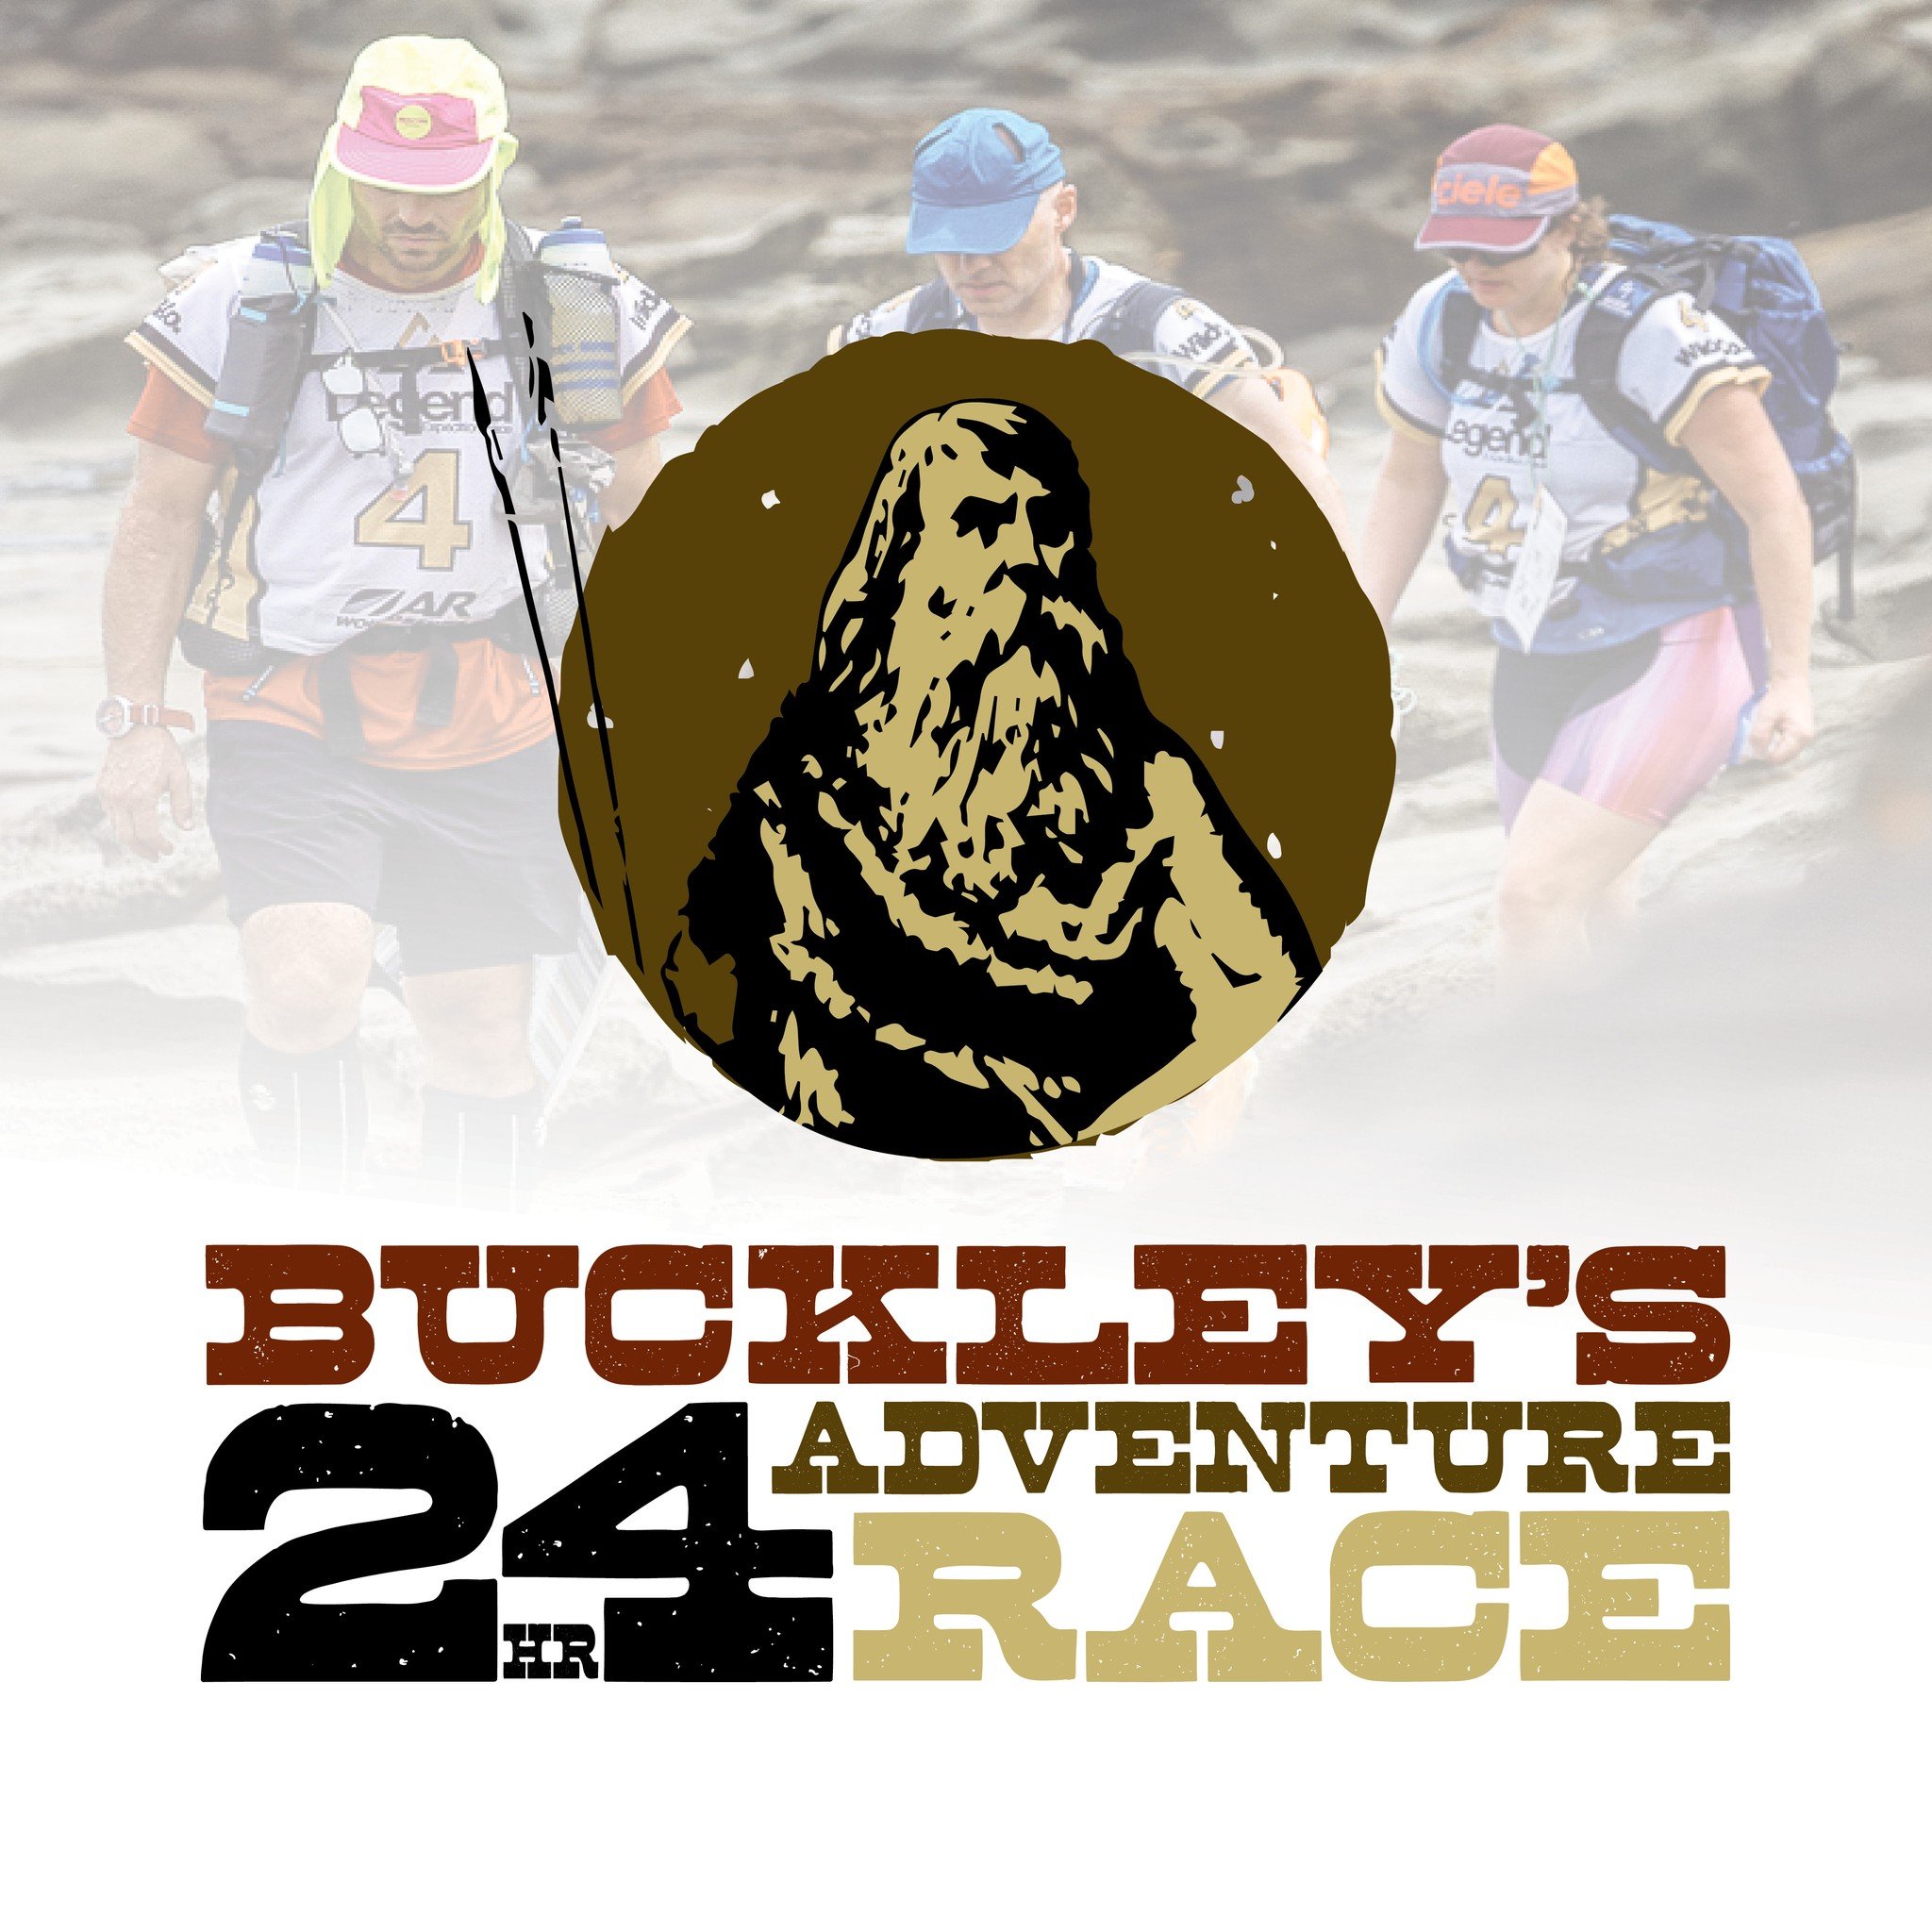 NEW 24hr ADVENTURE RACE IN VICTORIA!

We're very excited to launch the Buckley's 24hr Adventure Race, a brand new 24hr adventure race in Victoria. Inspired by the extraordinary adventures of convict William Buckley and the recent success of the Terra